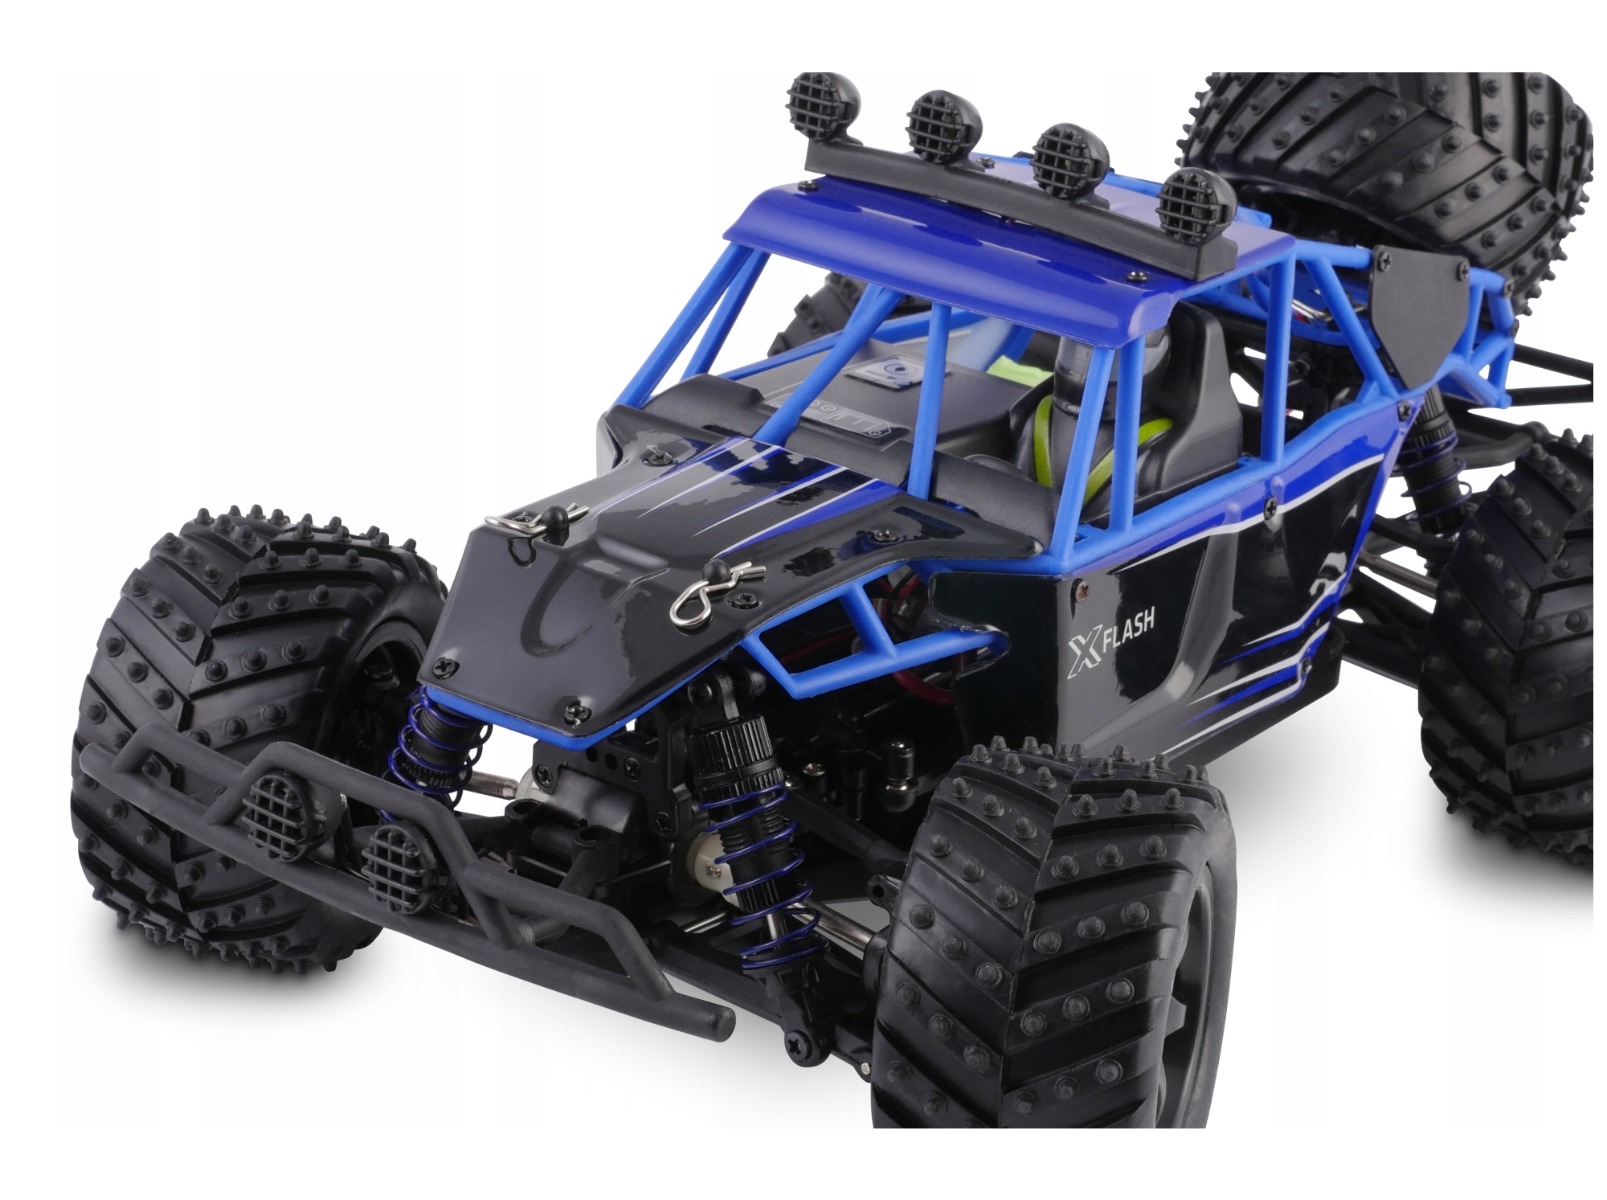 Overmax X-Flash — RC car with LEDs